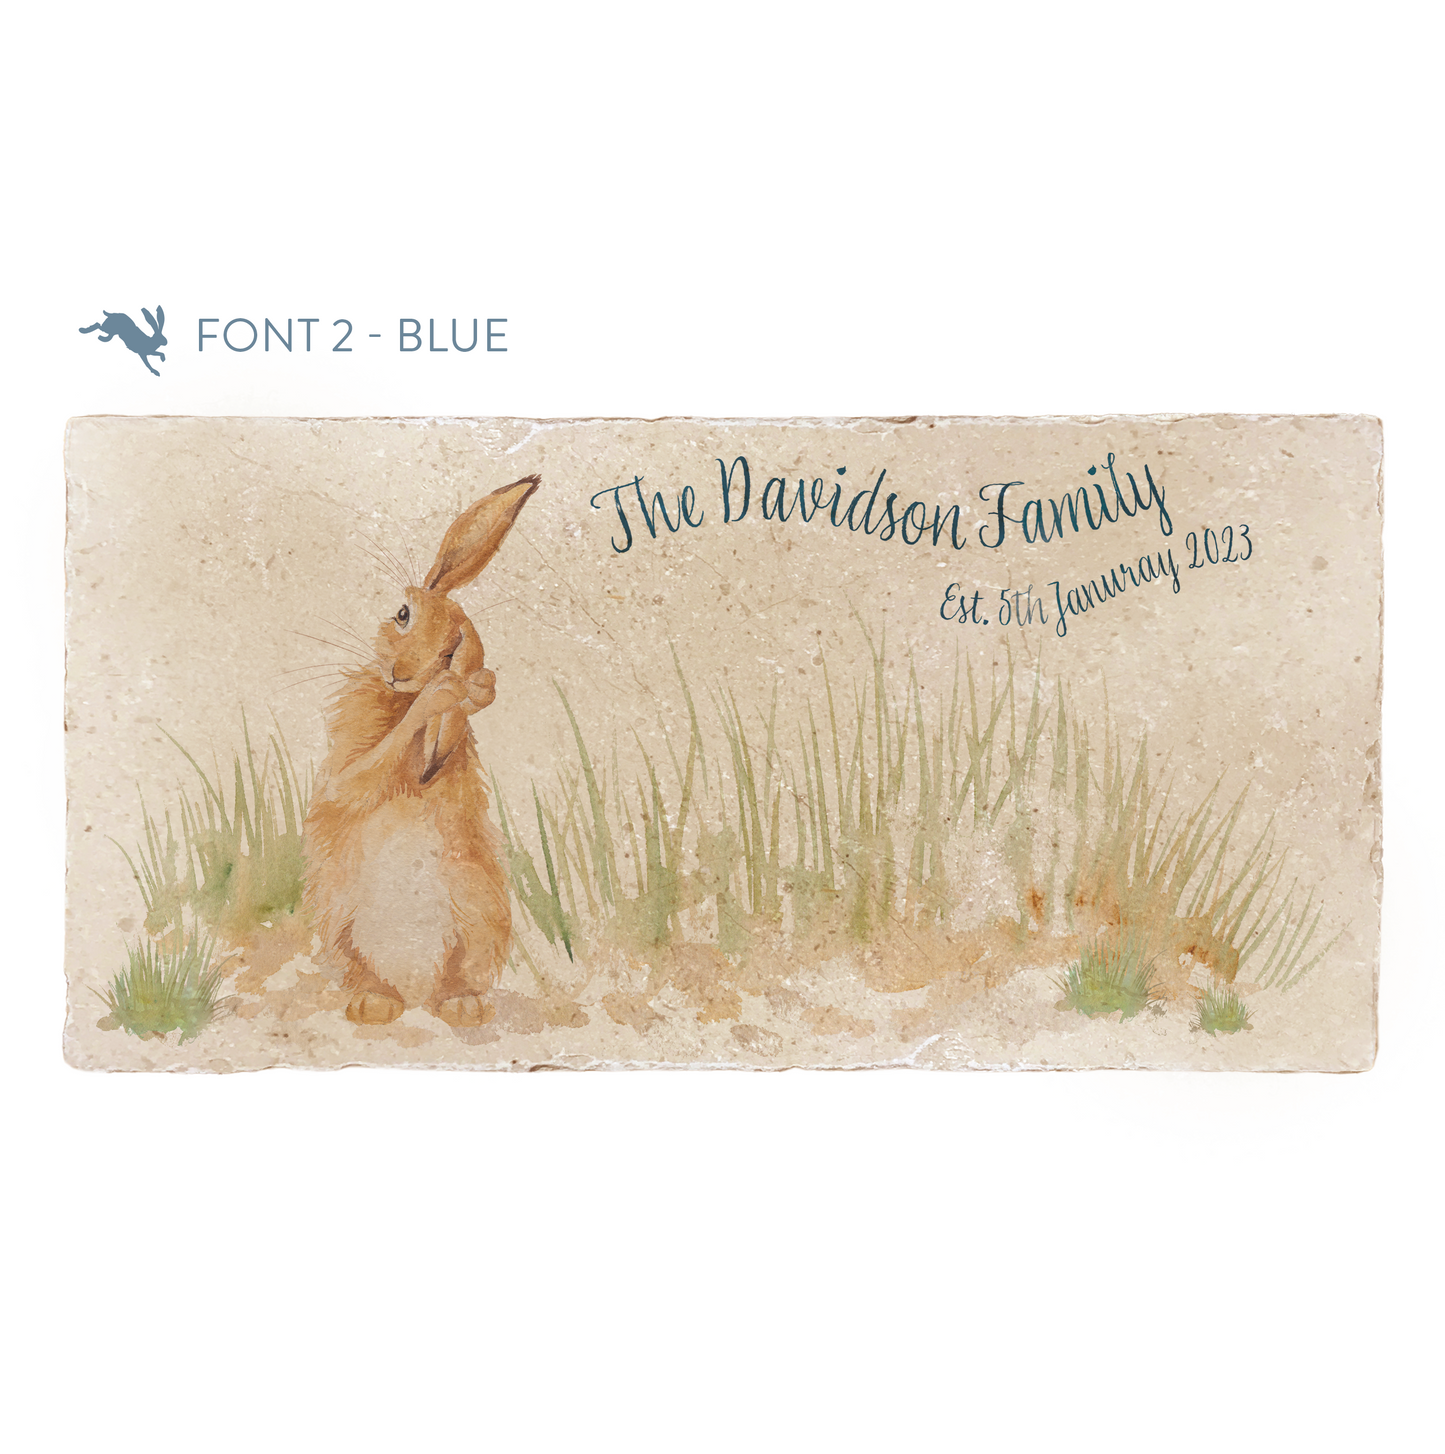 A personalised rectangular marble sharing platter featuring a hare washing his ear in a watercolour style. The example personalised dark blue text reads ‘The Davidson Family, Est. 5th January 2023’ in an elegant script font.